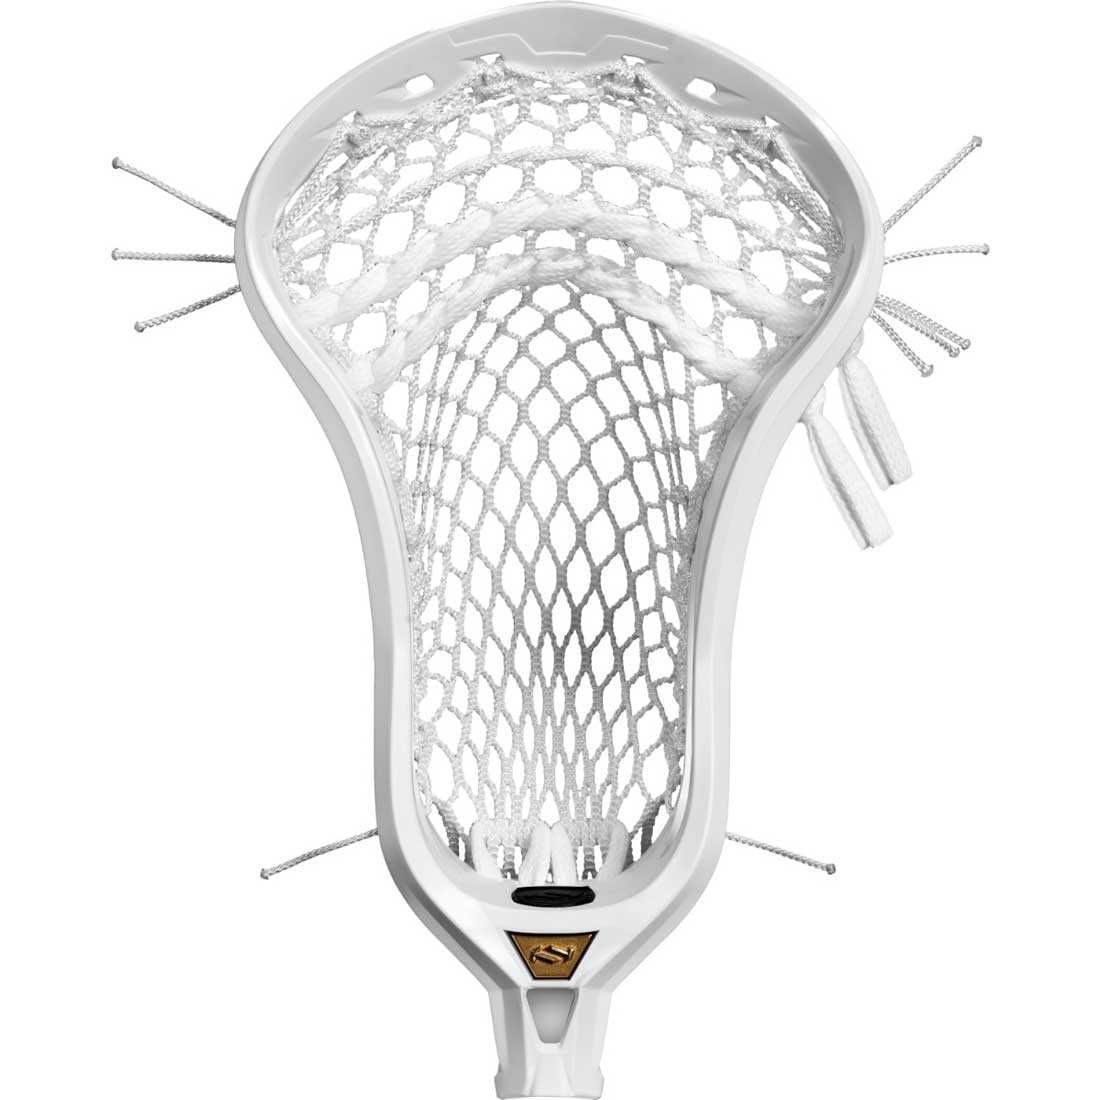 Full front picture of the True DYNAMIC Pro-Strung Lacrosse Head